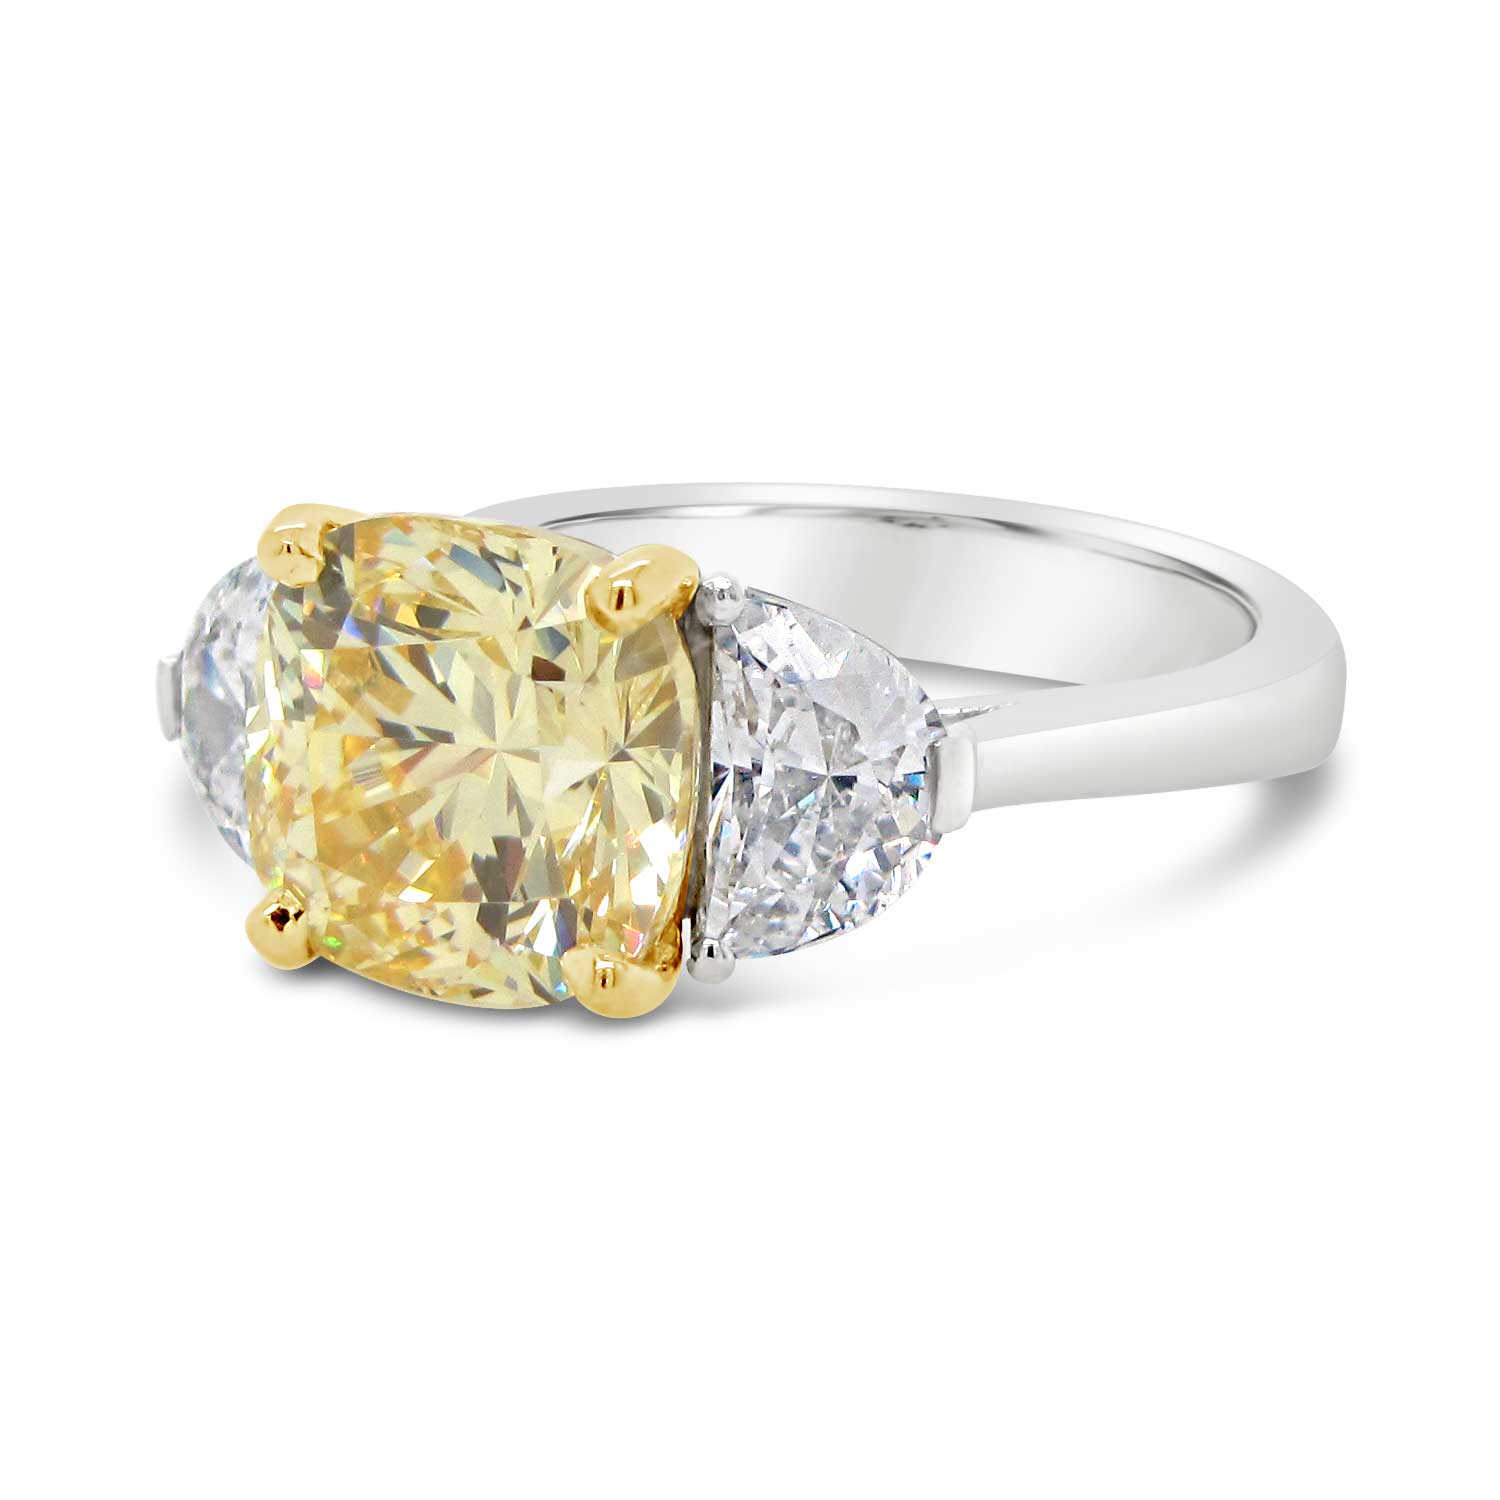 3ct yellow cushion cut center stone with two half-moon cut side stones set in 18k yellow gold and platinum